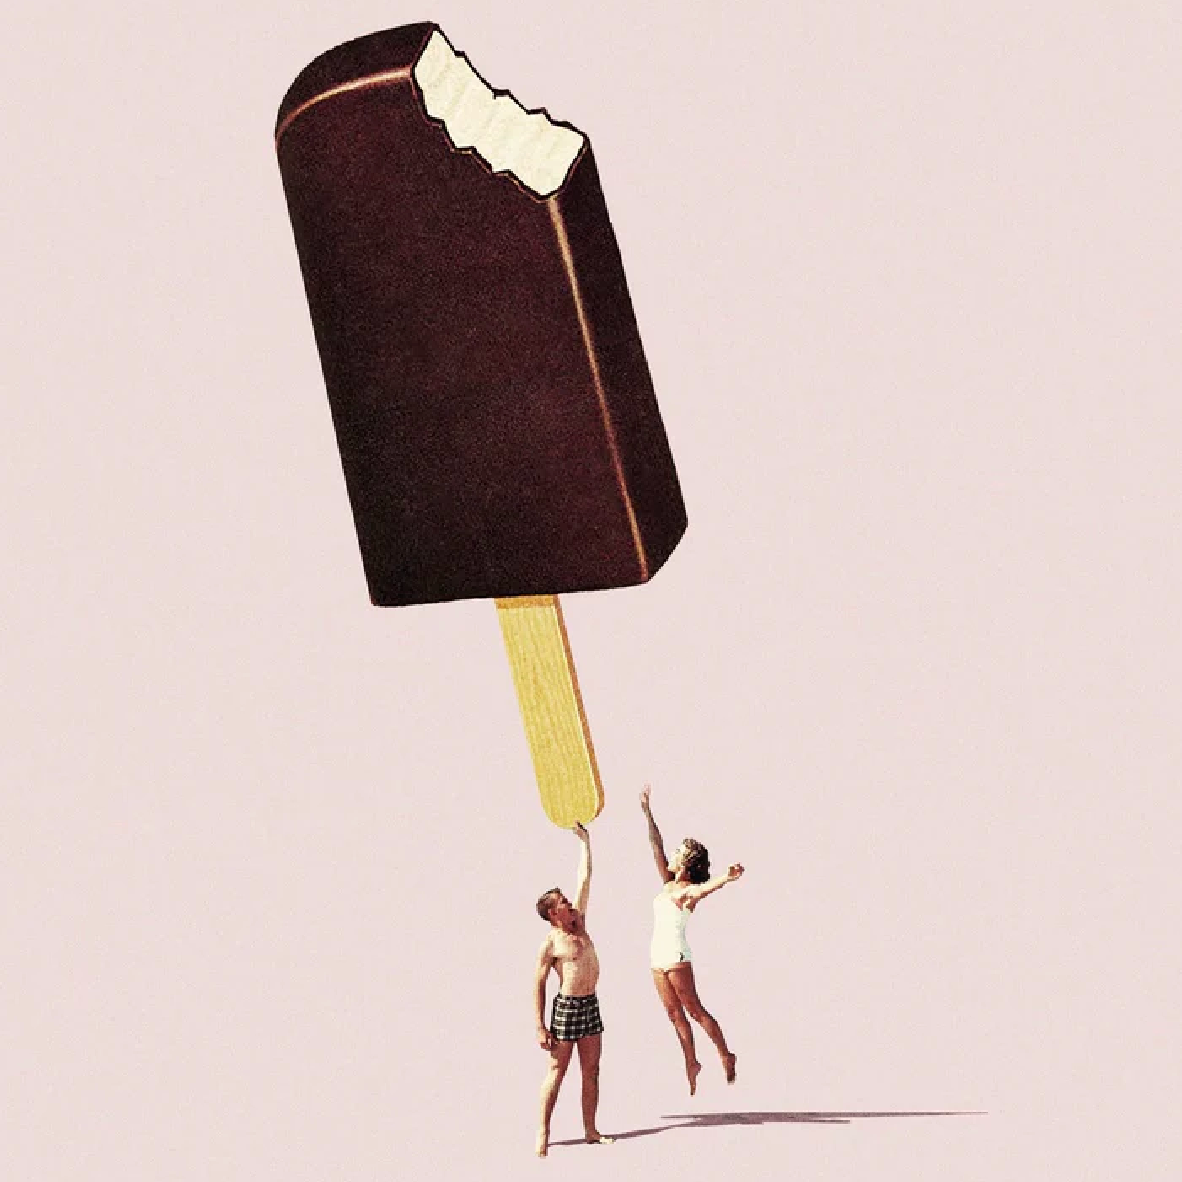 Art Poster A3 - Reach For Ice Cream